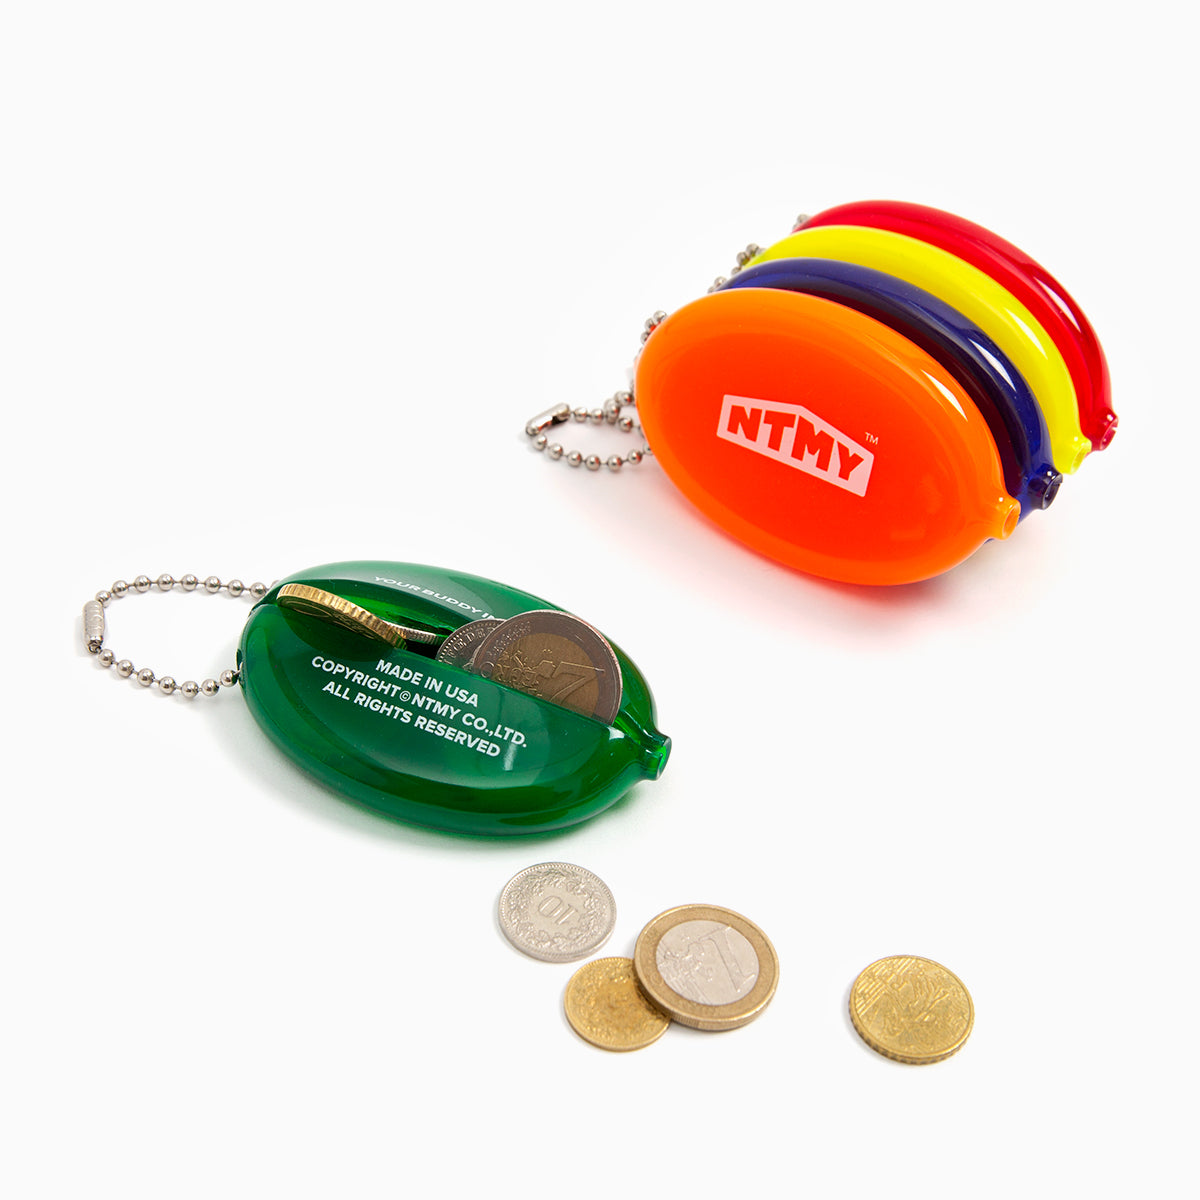 NTMY. Coin Holder